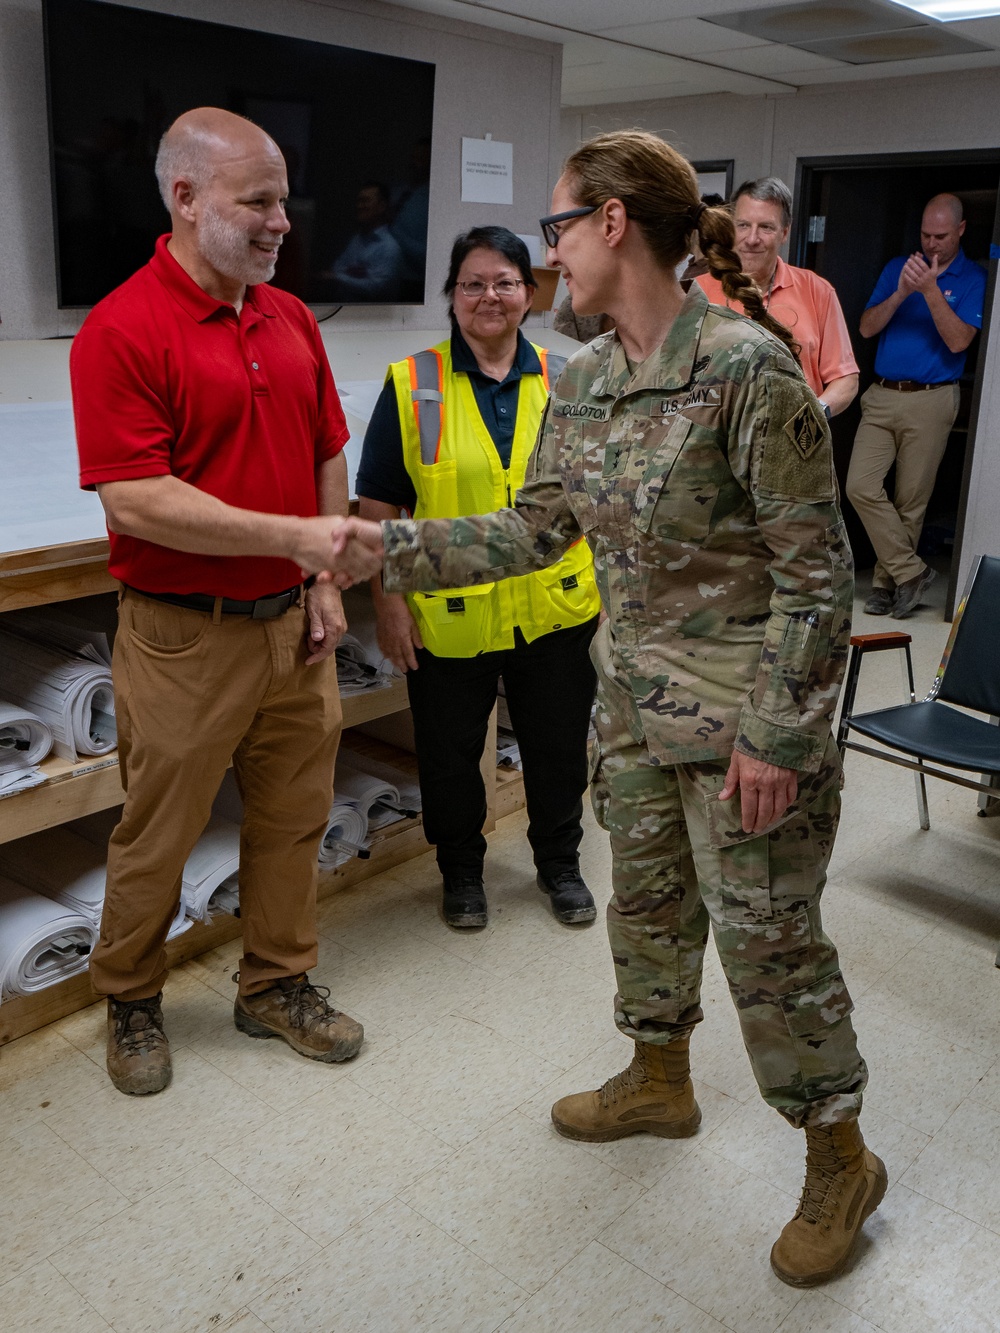 Exceptional performers recognized at USACE - VA meetup